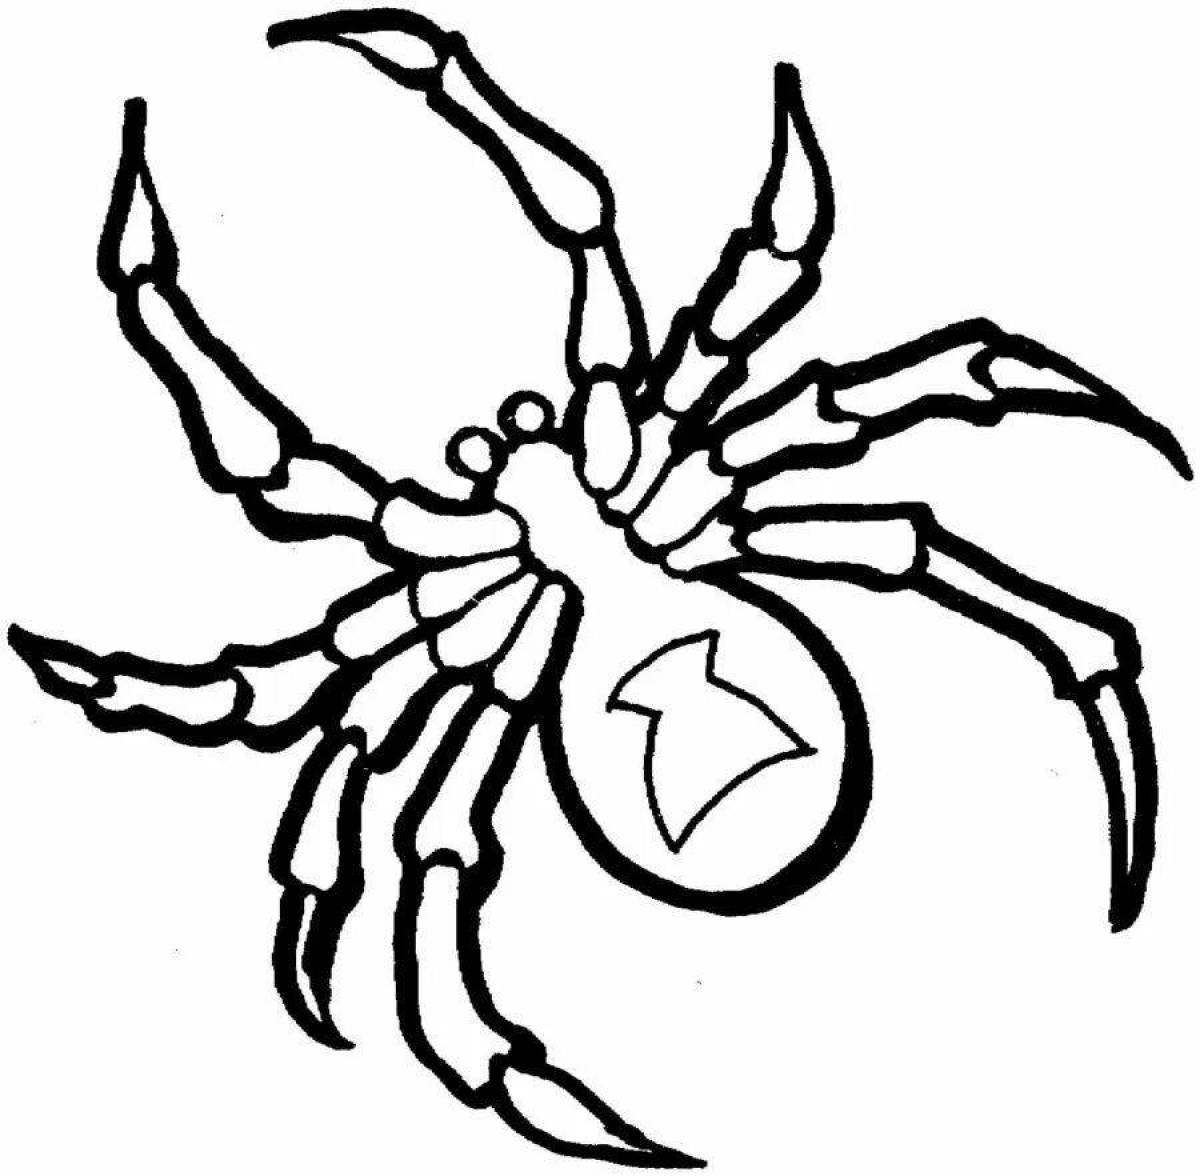 Amazing spider coloring page for kids